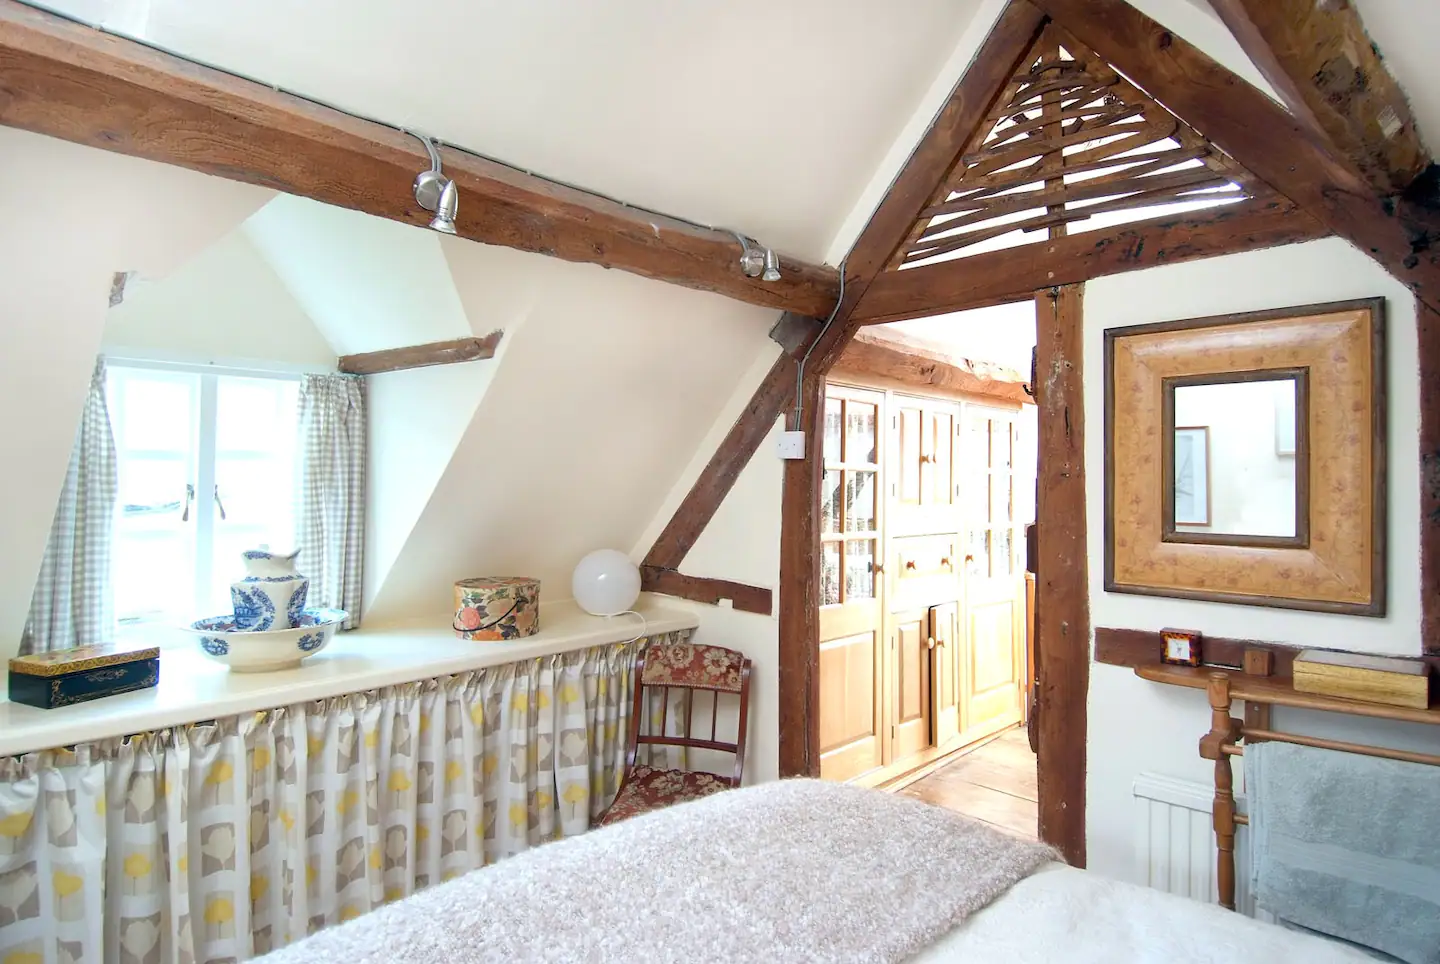 Look out the dormer window from your bed - there's extra storage space underneath it.